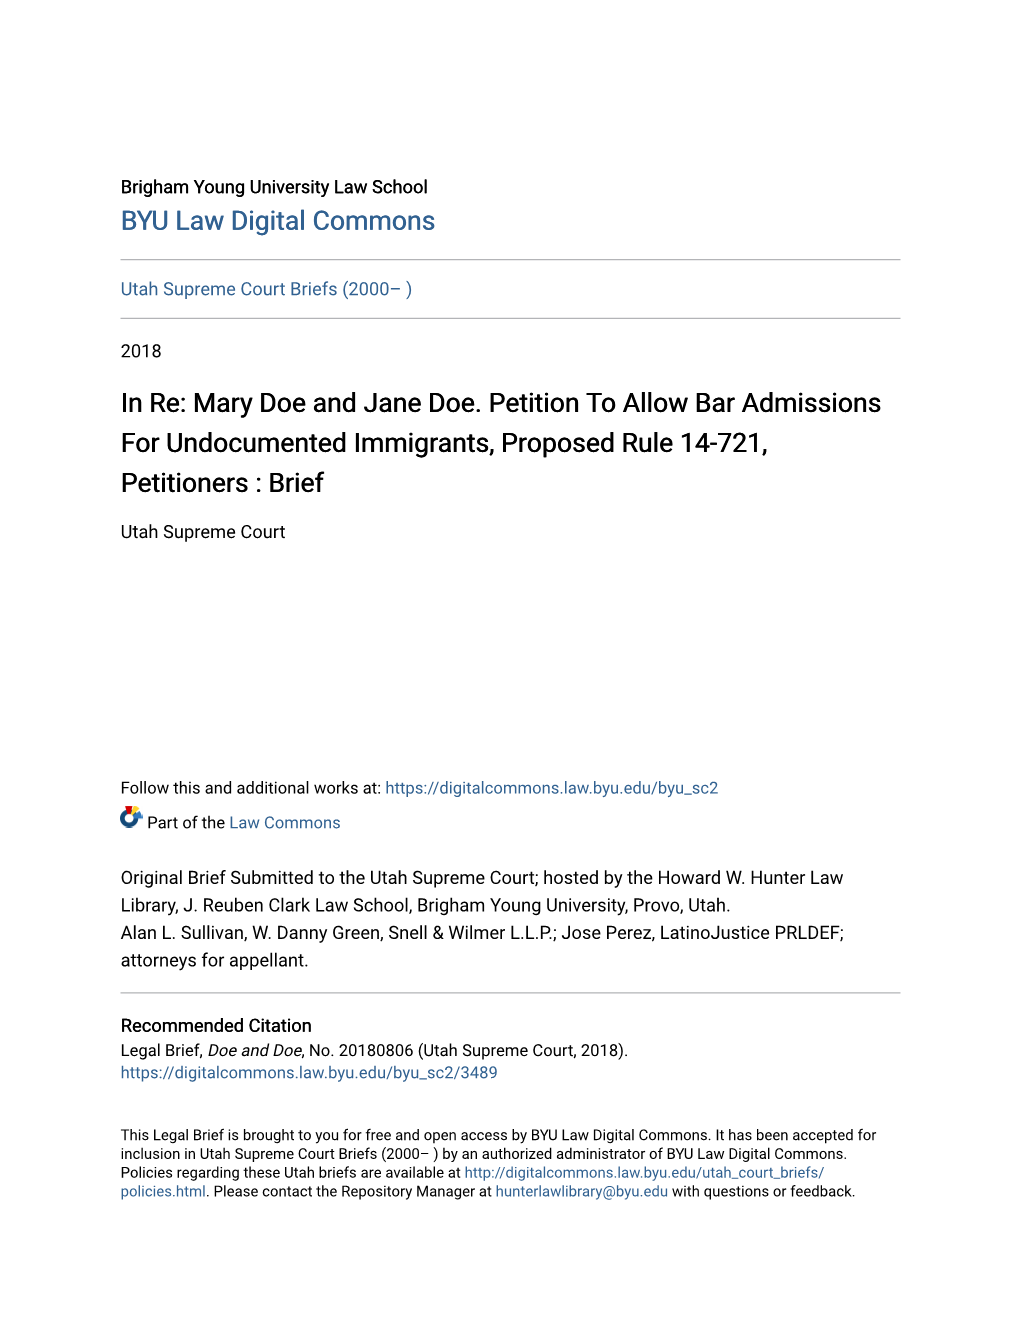 In Re: Mary Doe and Jane Doe. Petition to Allow Bar Admissions for Undocumented Immigrants, Proposed Rule 14-721, Petitioners : Brief